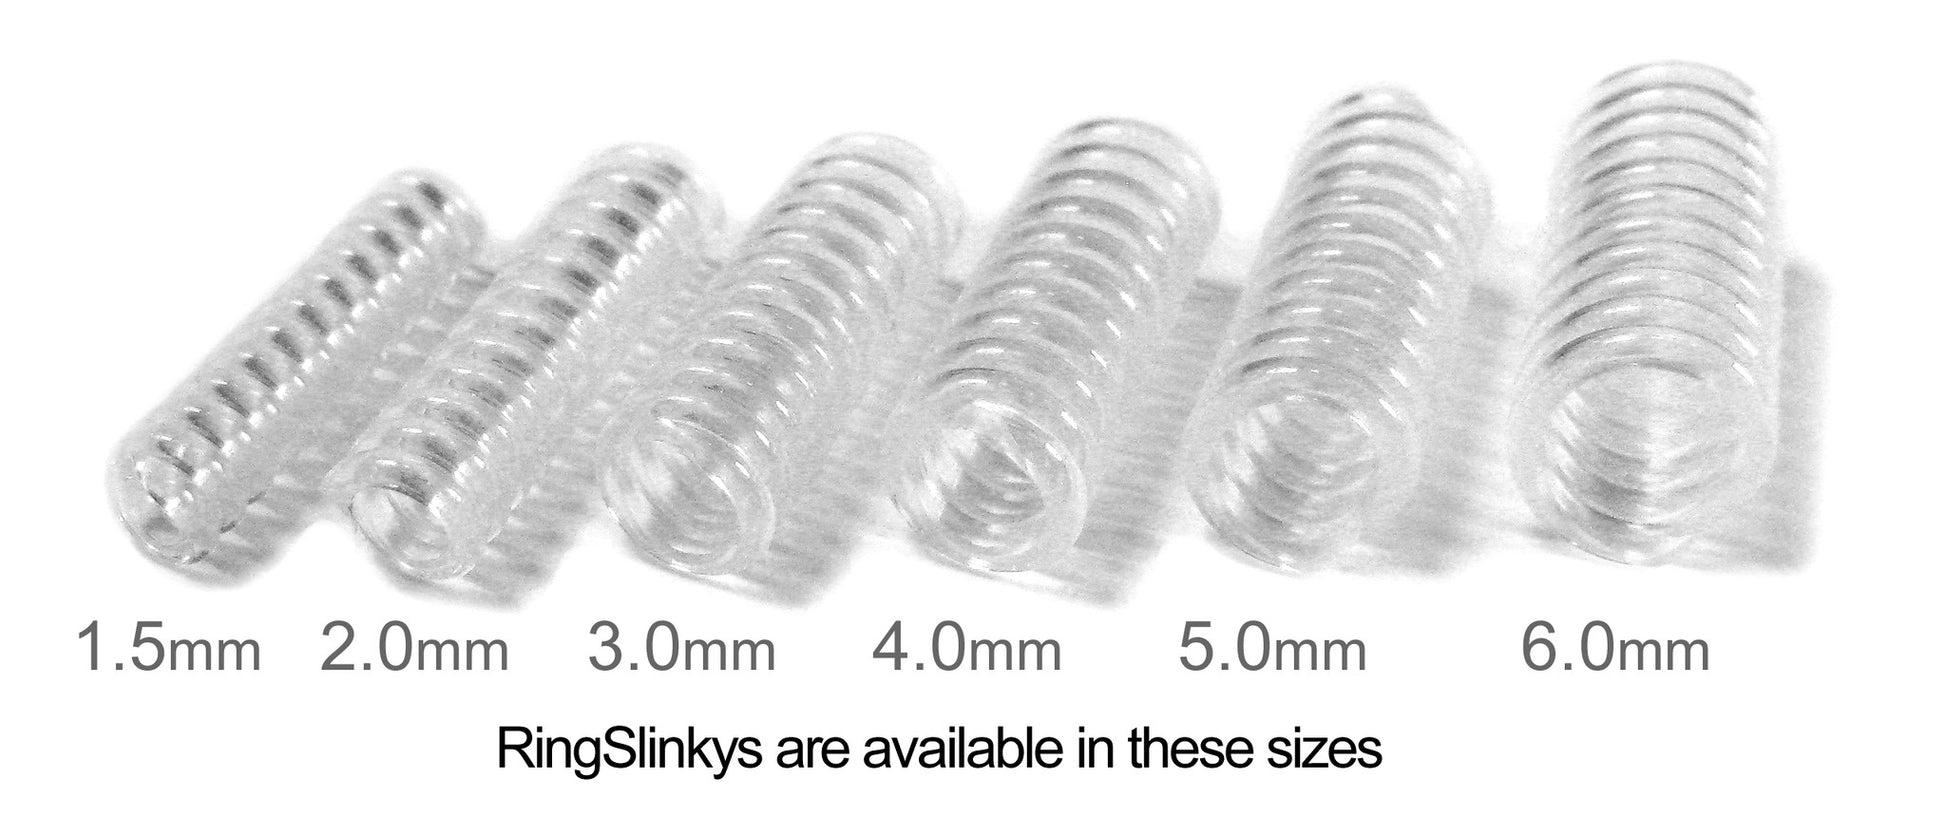 RingSlinky: Ring Size Reducer | Ring Guard | Ring Size Adjuster. Size: 1.5  mm, for rings 1 mm to 2 mm wide.